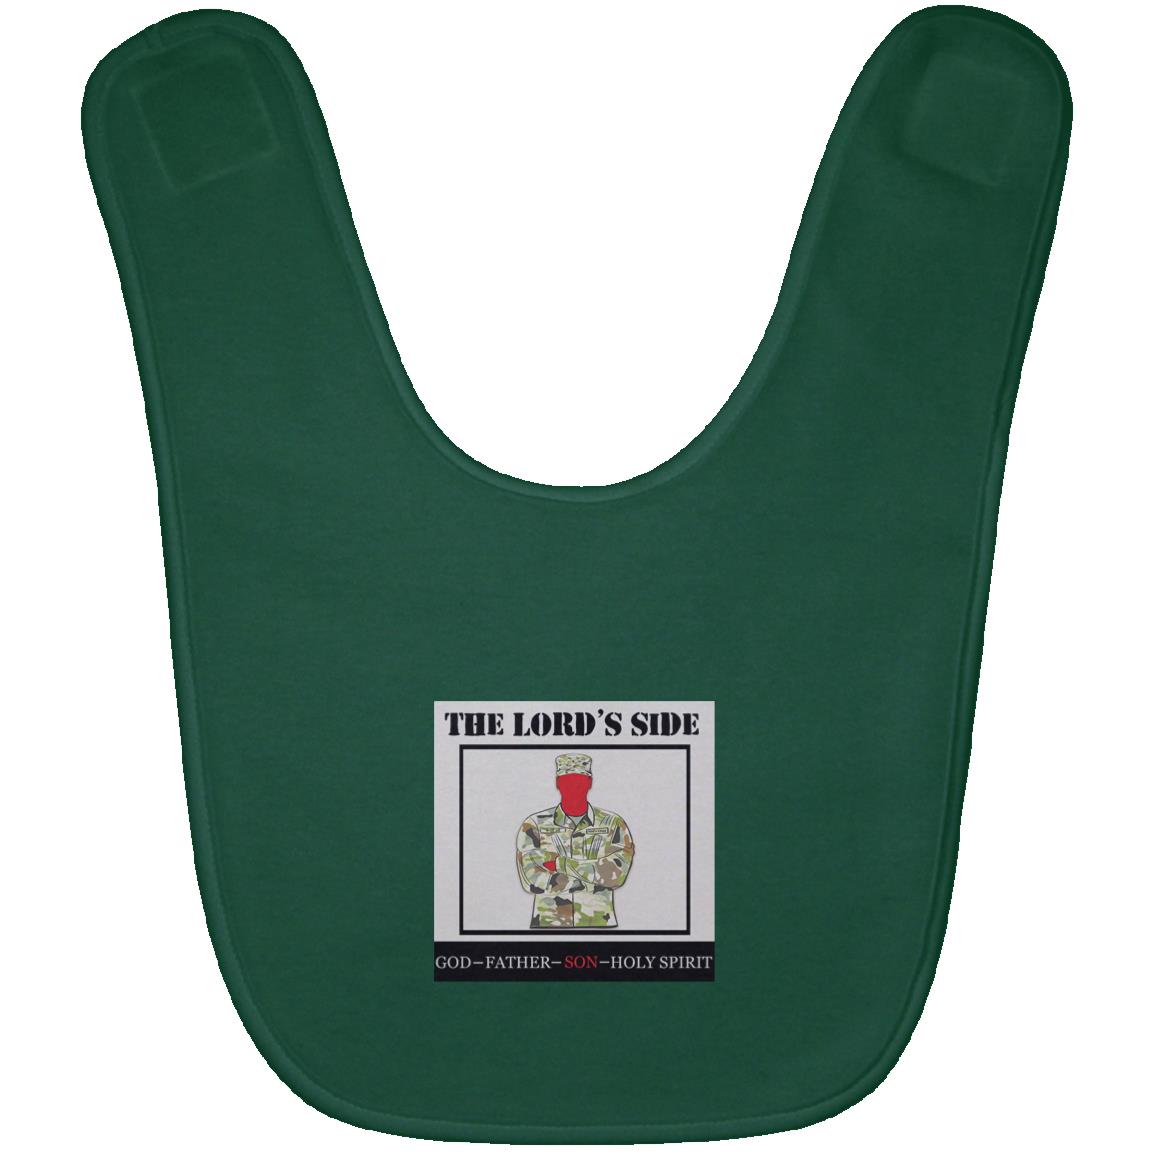 The Lord's Side Baby Bib